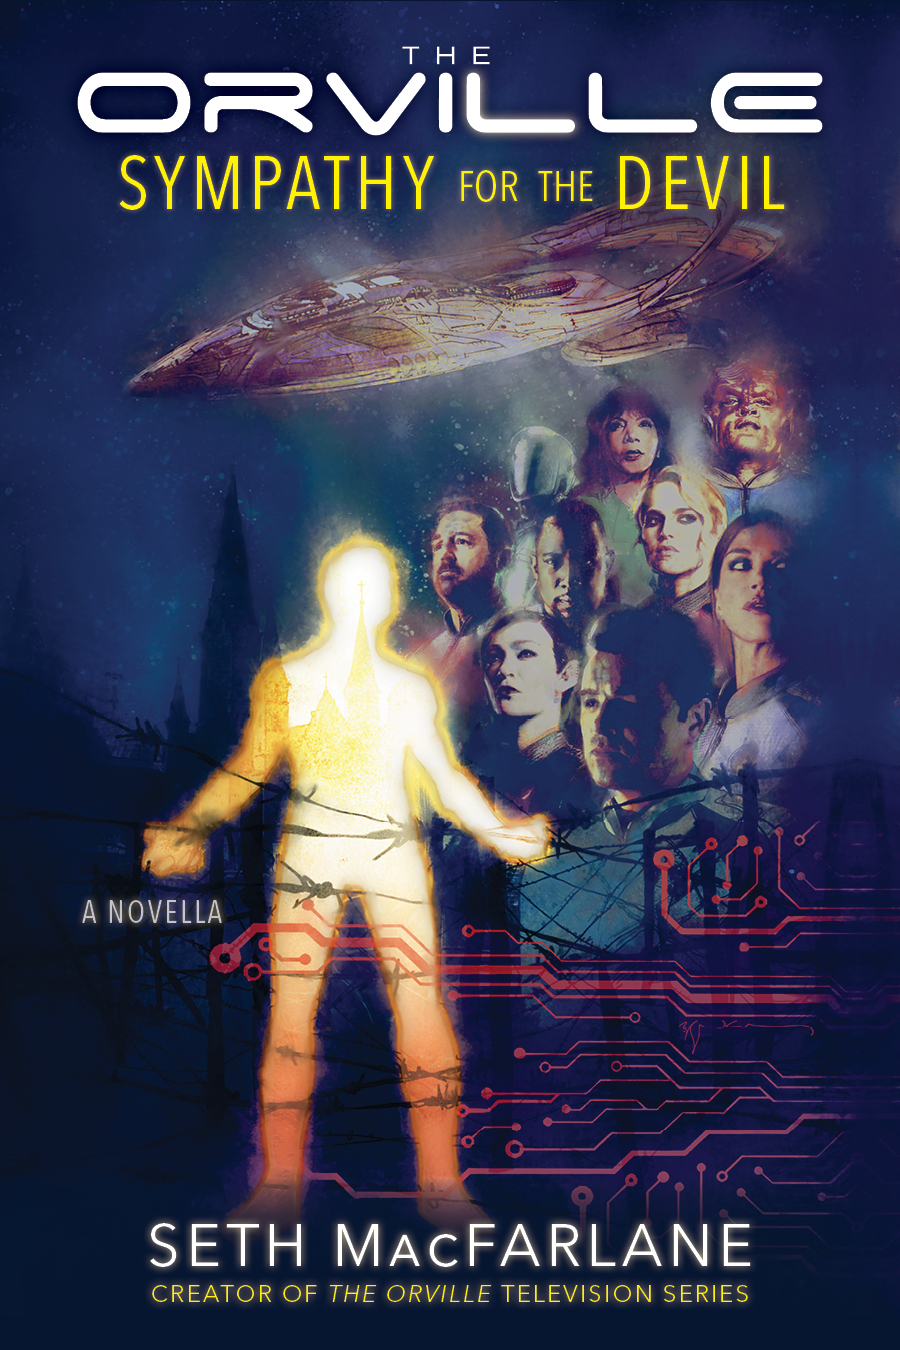 The Orville: Sympathy for the Devil cover art